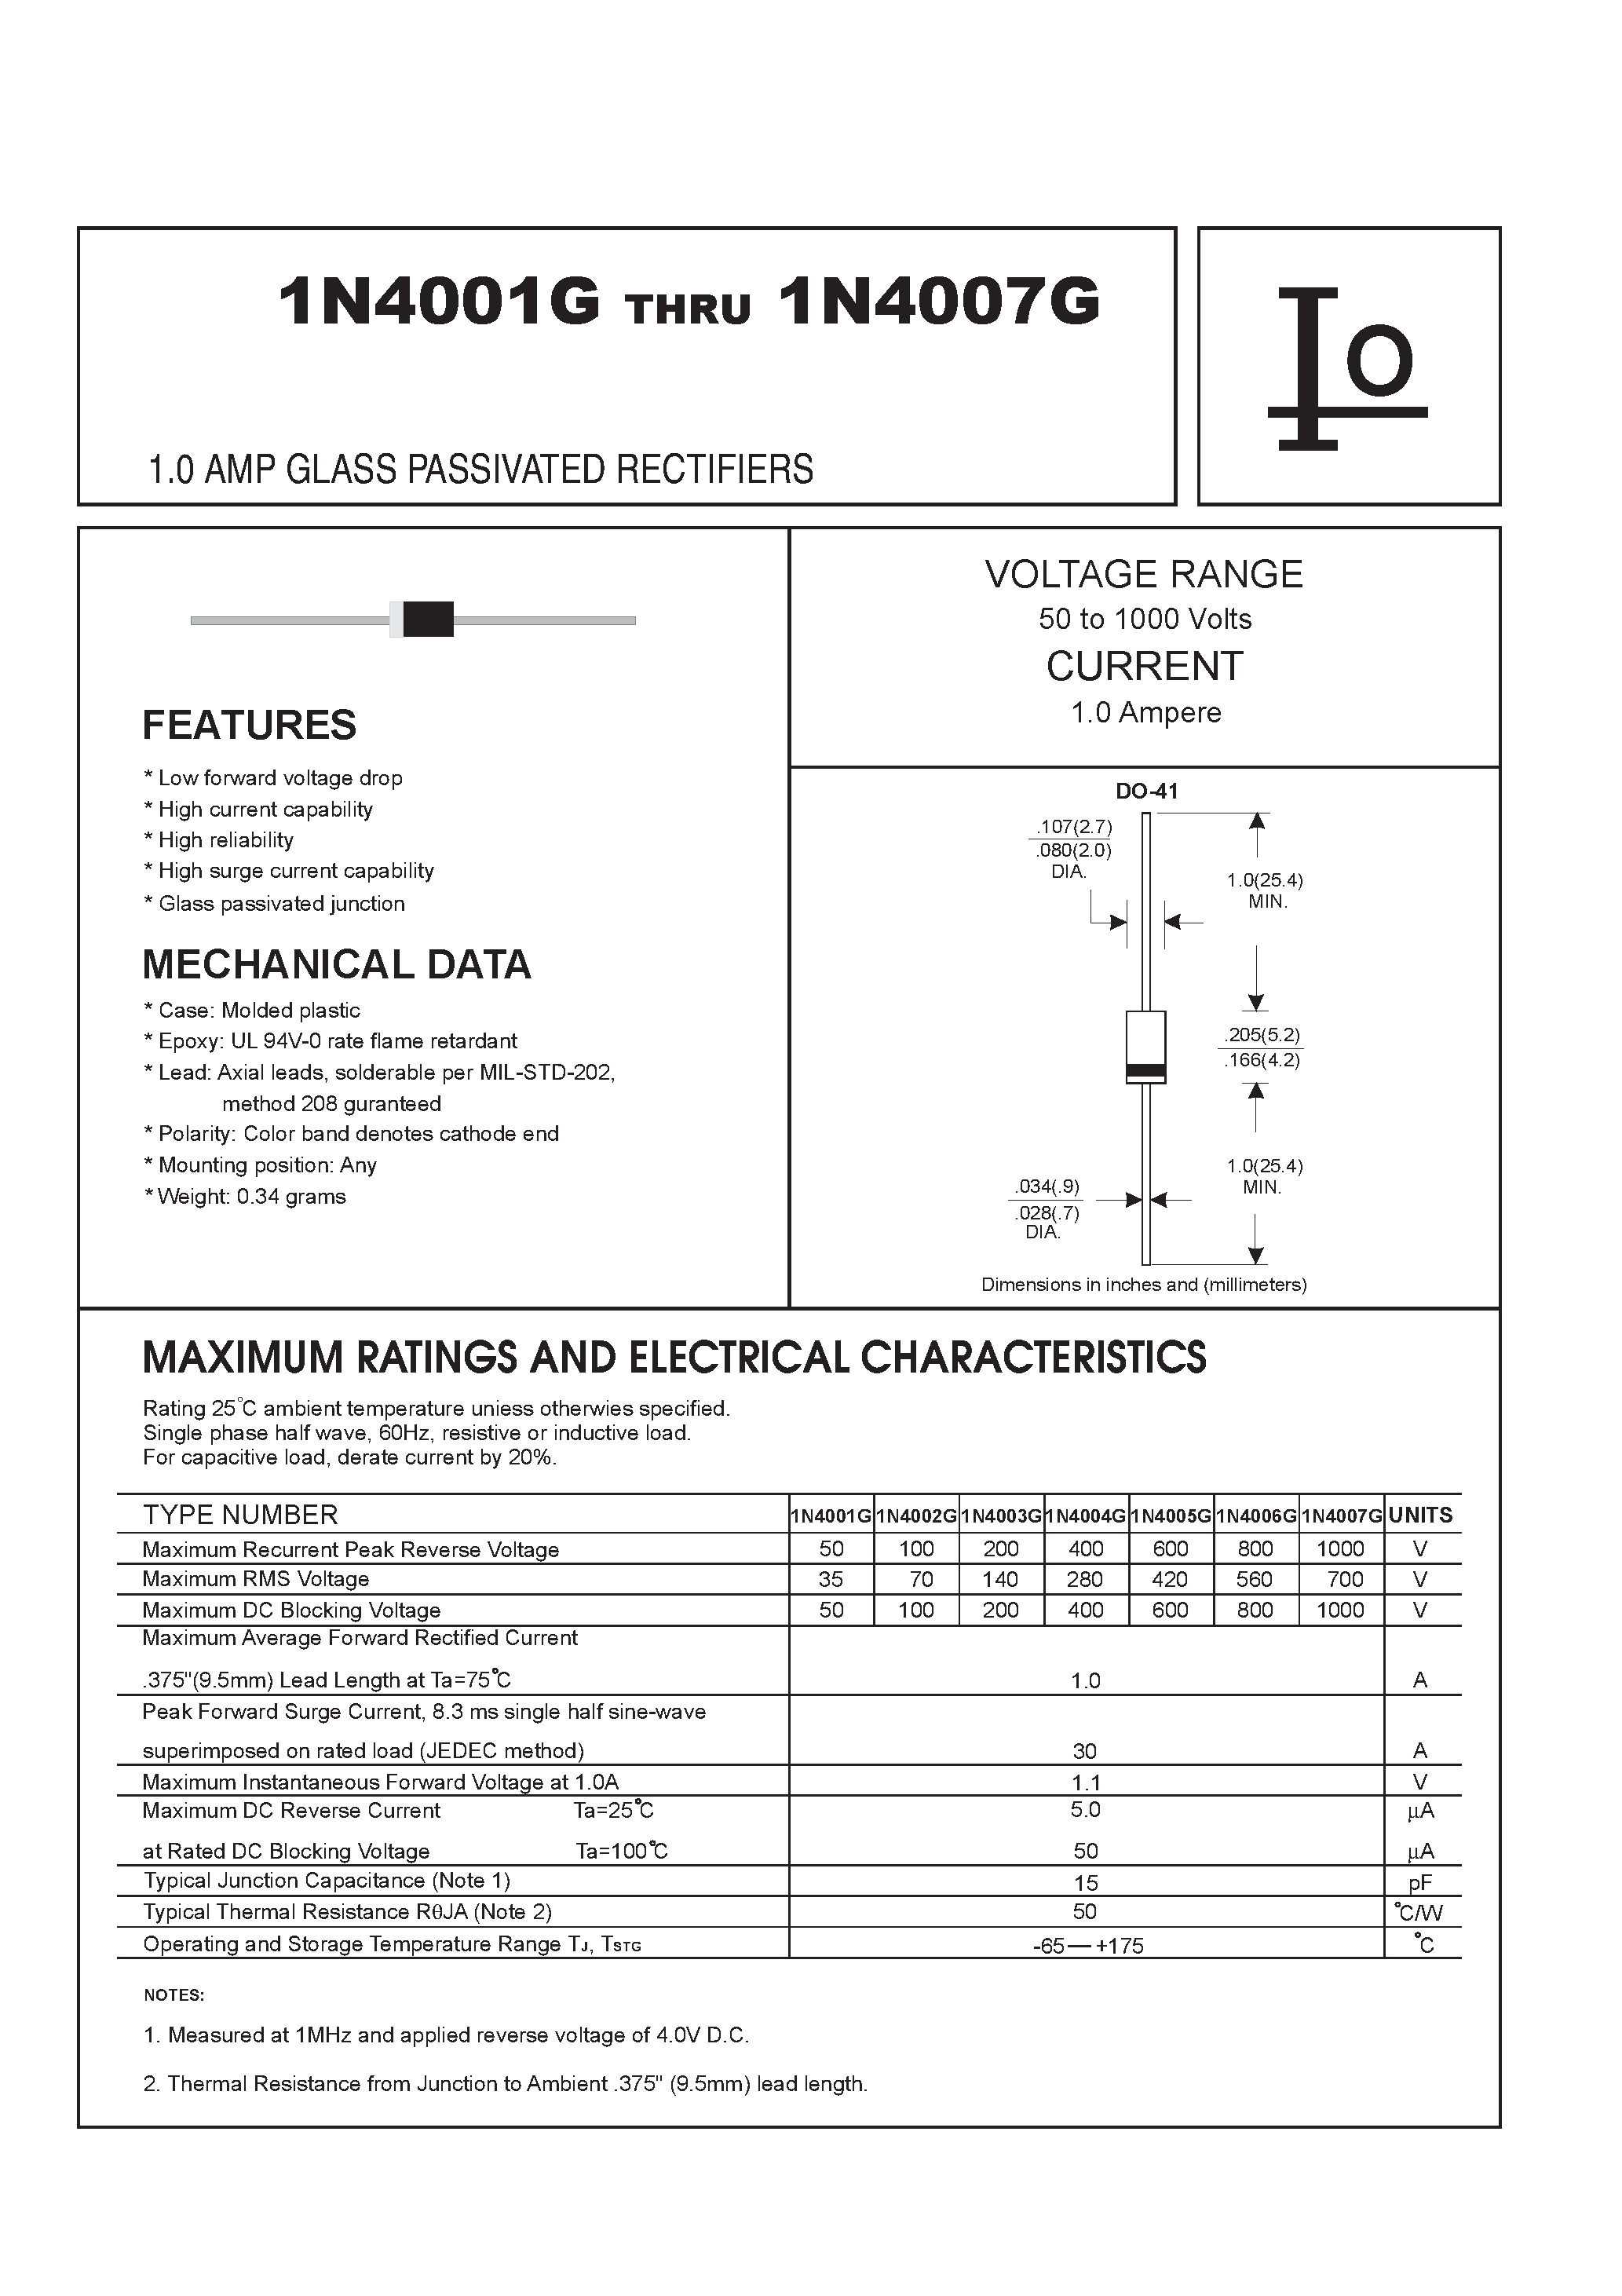 Datasheet 1N4001G - (1N4001G - 1N4007G) 1.0 AMP GLASS PASSIVATED RECTIFIERS page 1